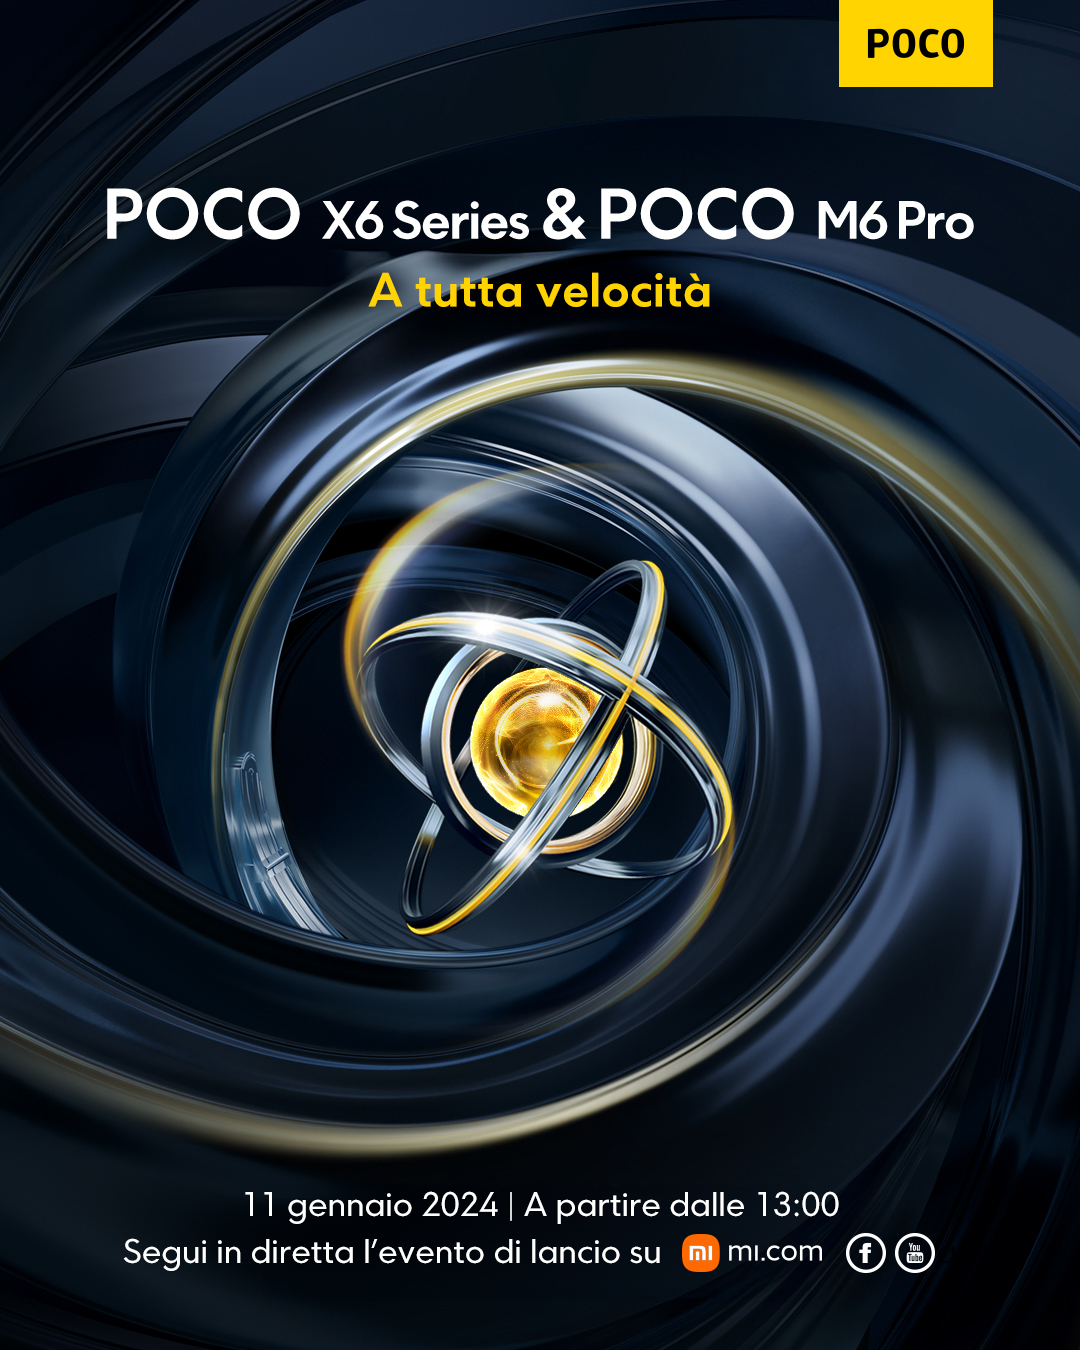 Poco X6 Series and Poco M6 Pro: arriving in Italy